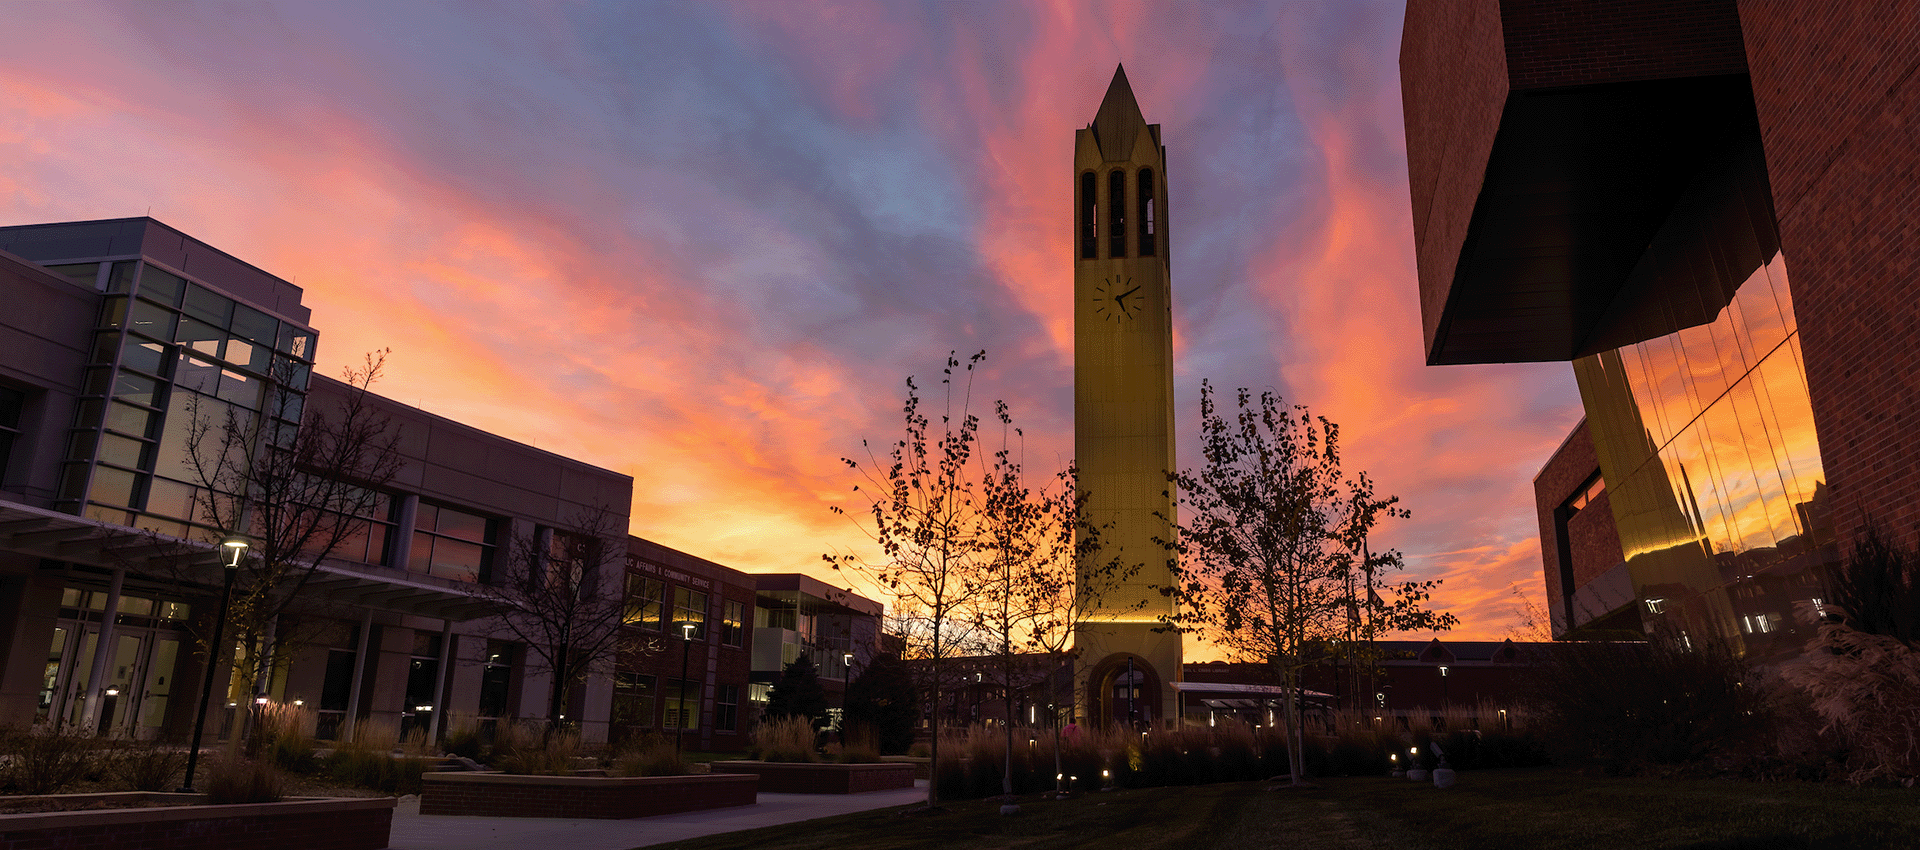 The University of Nebraska at Omaha campus, center-image is the Henningson Memorial Campanile set with a orange, blue, and yellow sunset.